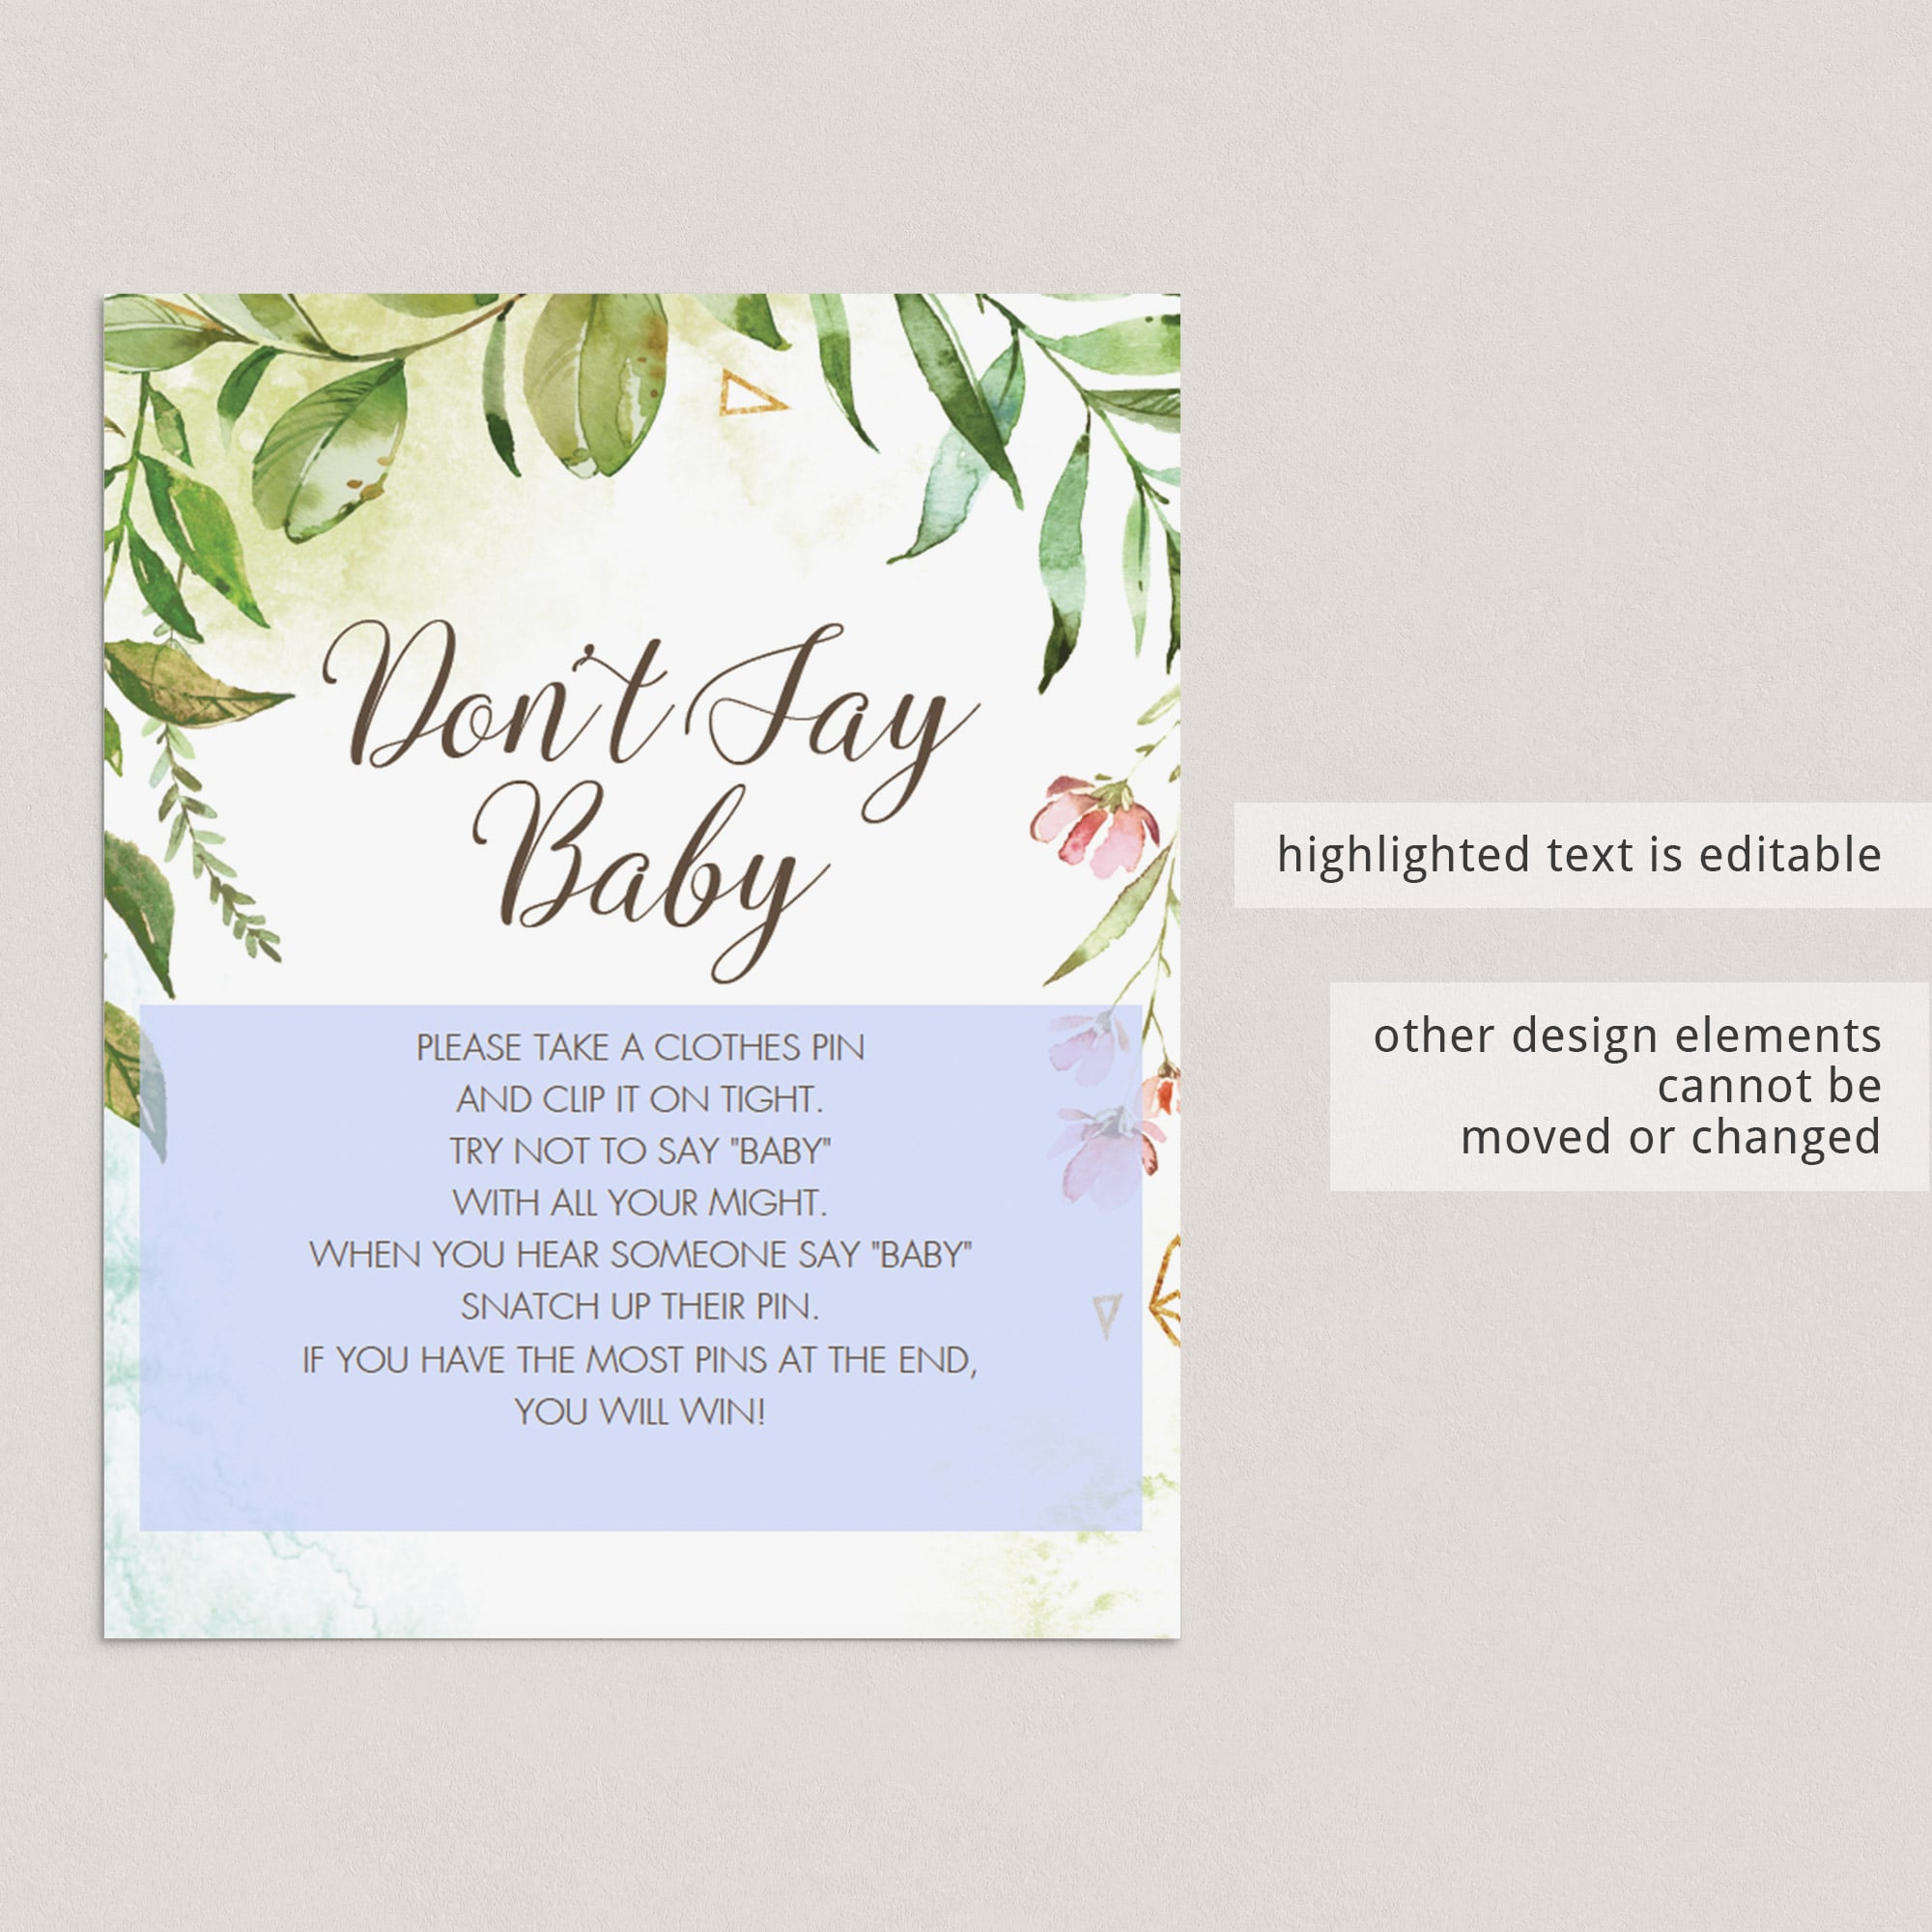 Fun and creative baby shower games instant download by LittleSizzle